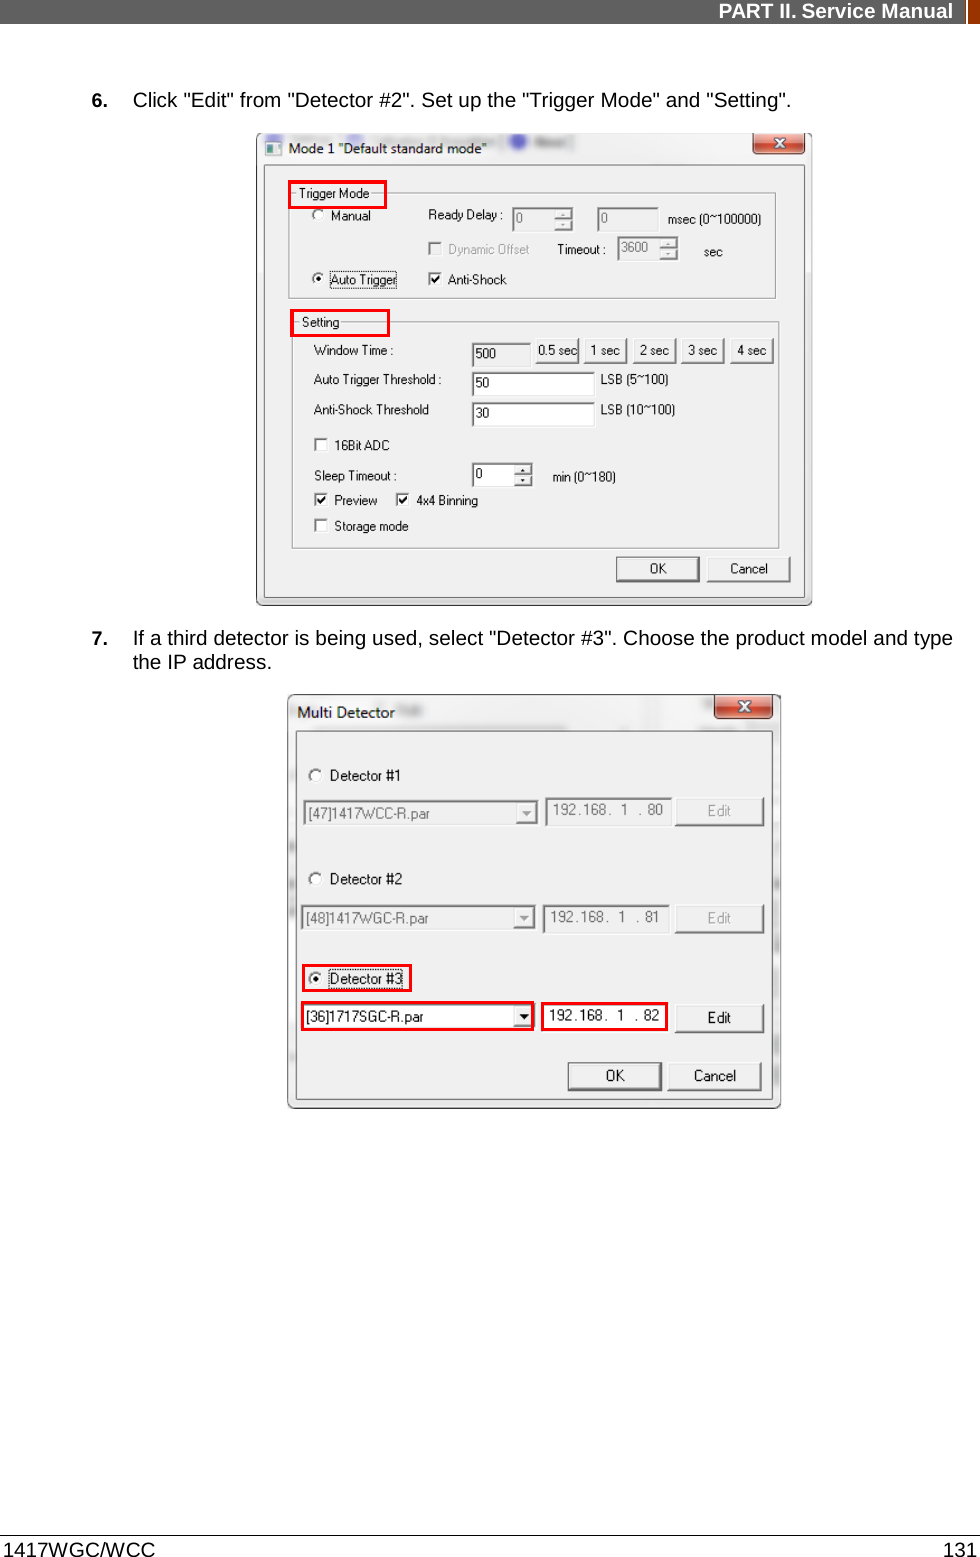 PART II. Service Manual  1417WGC/WCC 131 6. Click &quot;Edit&quot; from &quot;Detector #2&quot;. Set up the &quot;Trigger Mode&quot; and &quot;Setting&quot;.  7. If a third detector is being used, select &quot;Detector #3&quot;. Choose the product model and type the IP address.            